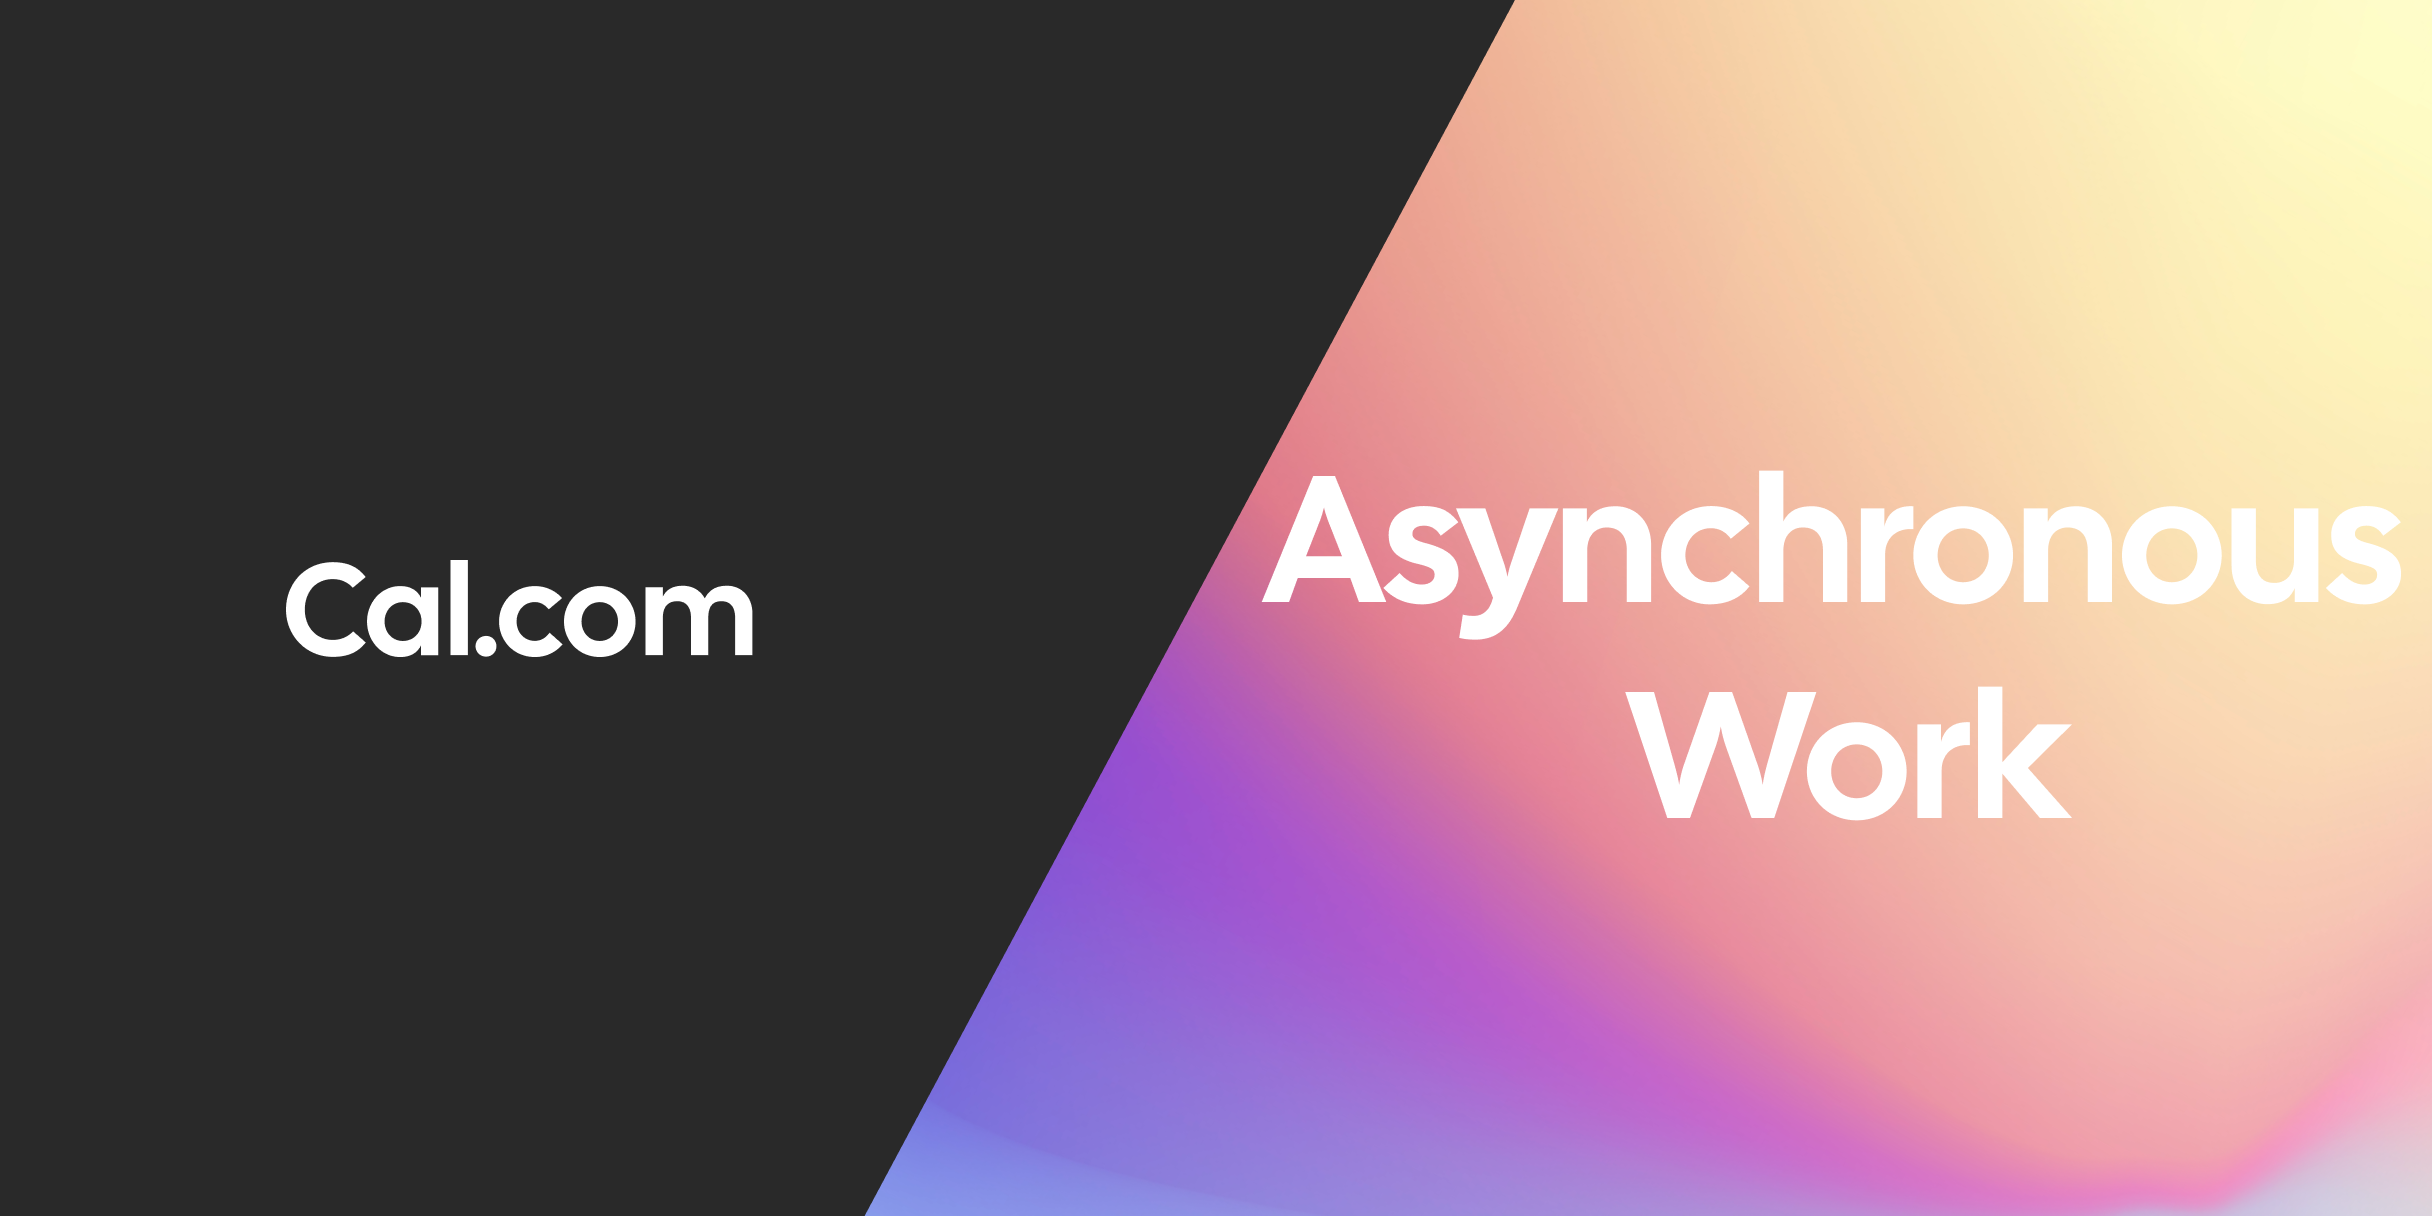 Scheduling for asynchronous work